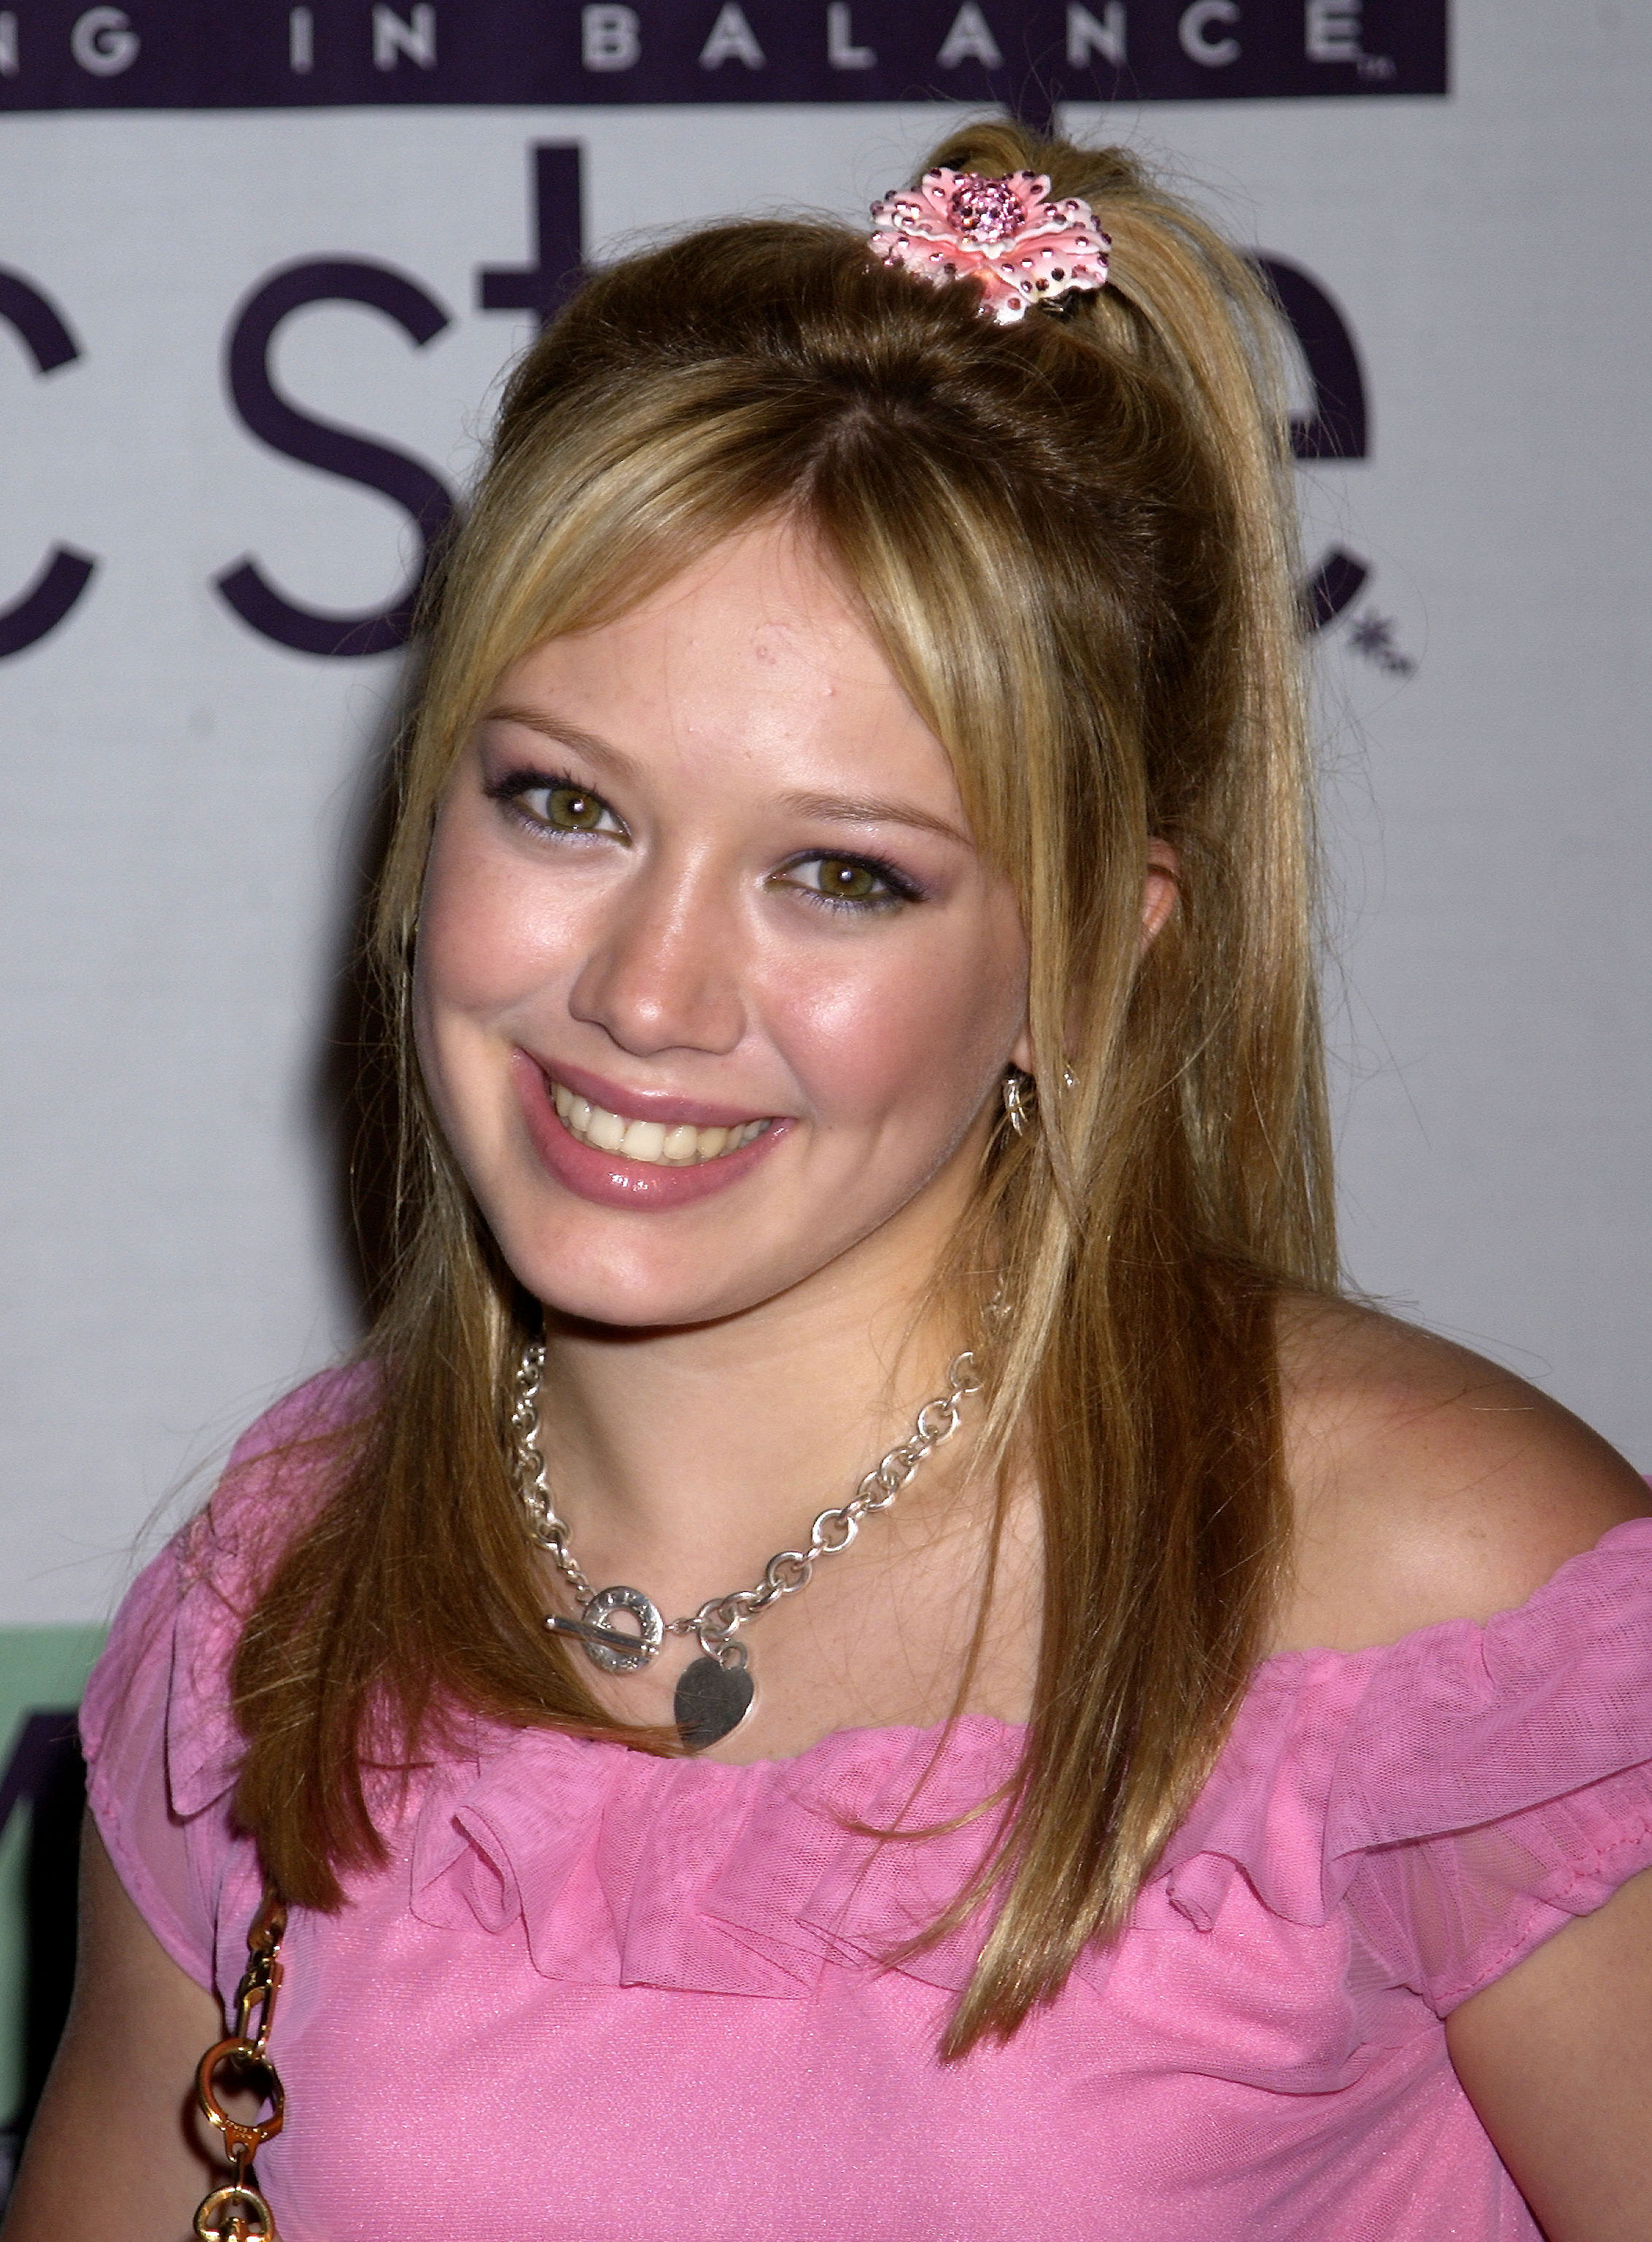 Lizzie Mcguire Cast See What The Disney Stars Are Up To Now